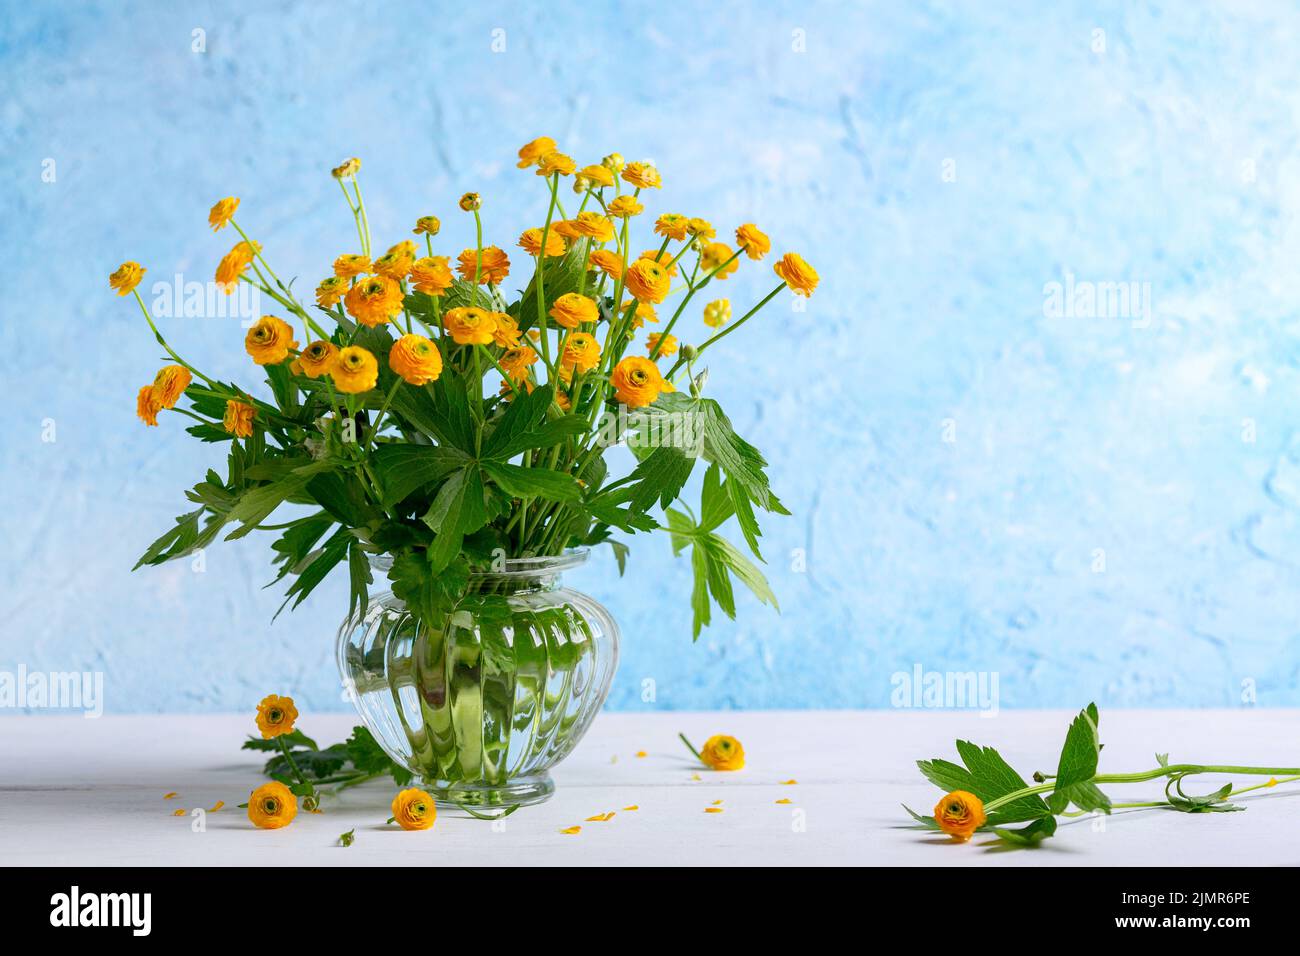 Little yellow buttercups in a vase. Stock Photo